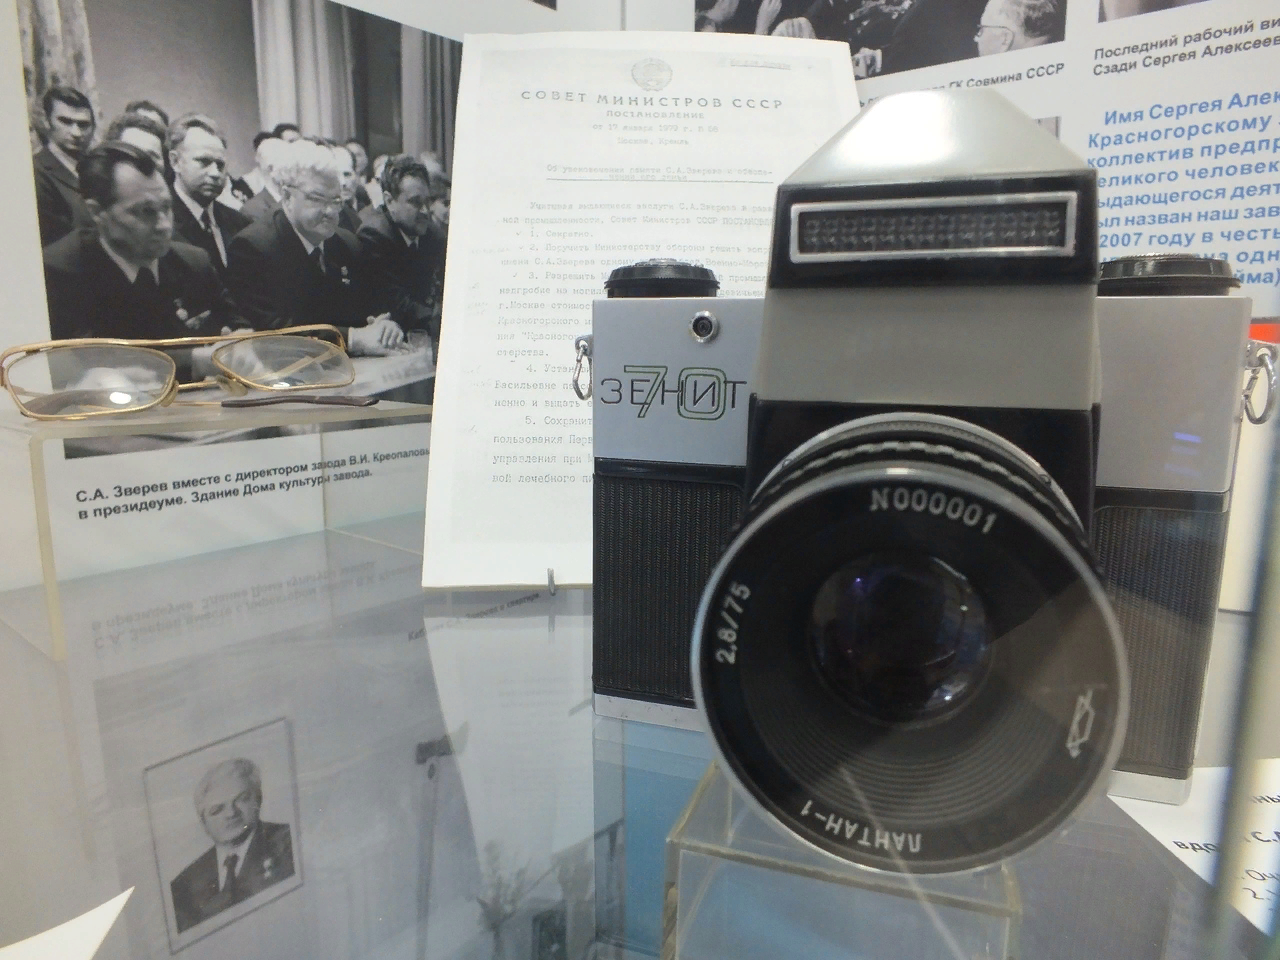 A gift to the Minister of Defense Industry of the USSR S. A. Zverev from the staff of the Krasnogorsk Mechanical Plant - Presents, Story, Interesting, Informative, Camera, Technics, the USSR, Factory